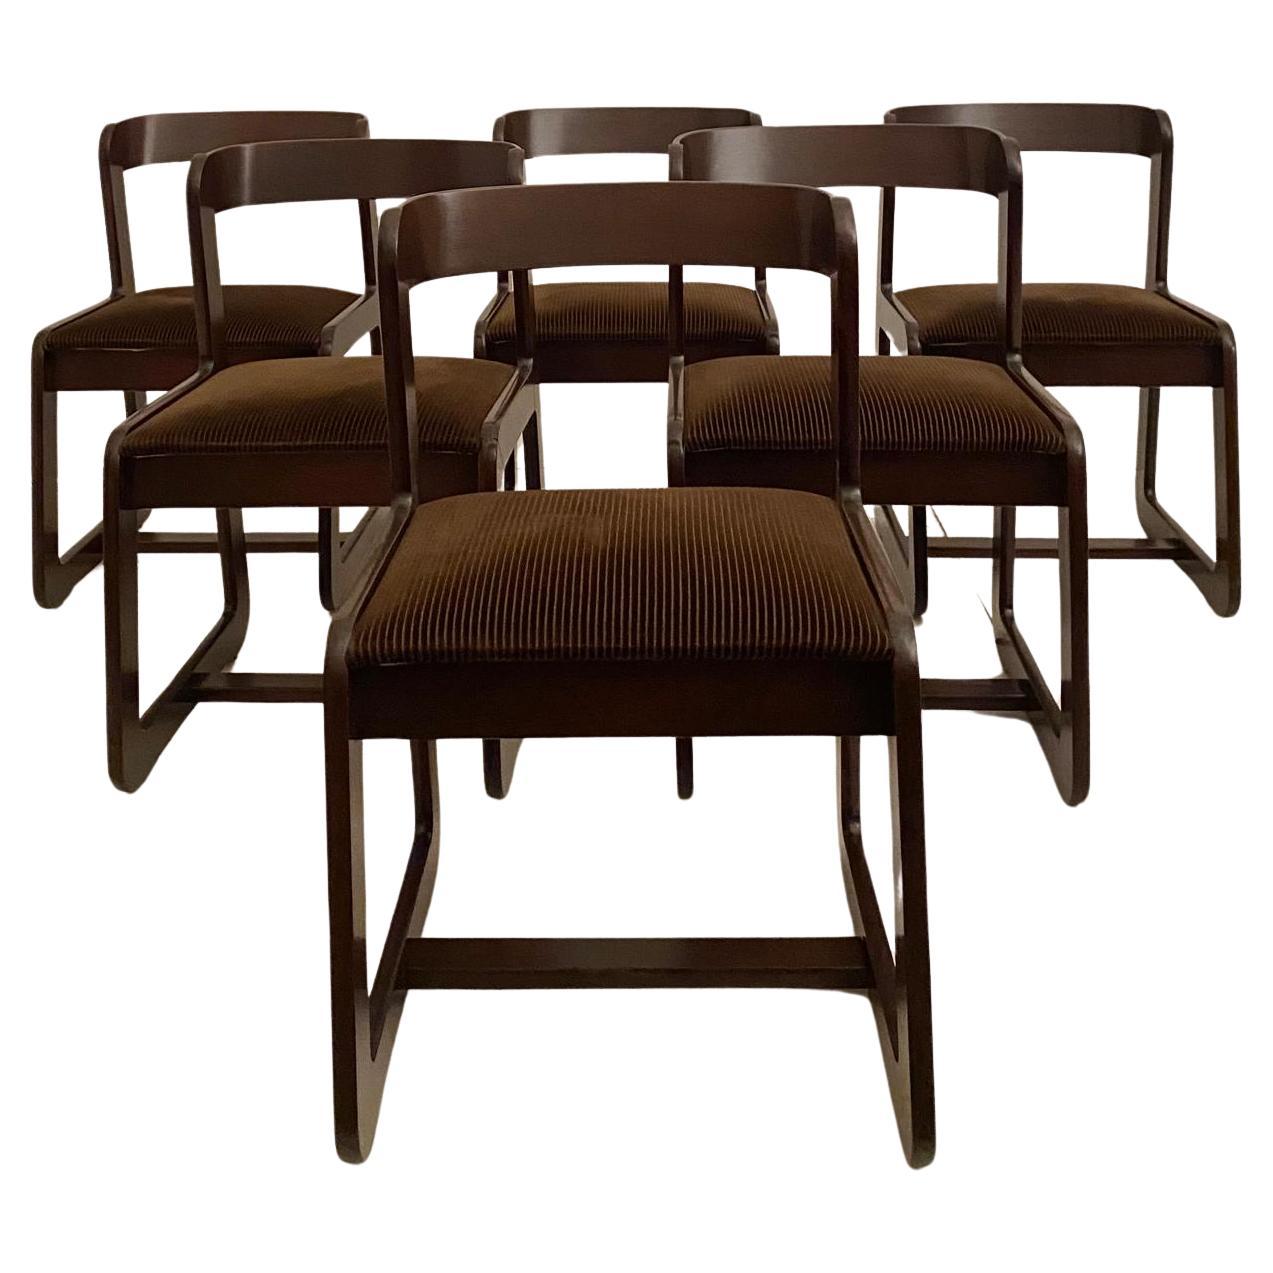 Willy Rizzo fro sabot dining chairs, set of six, Italy 1970s